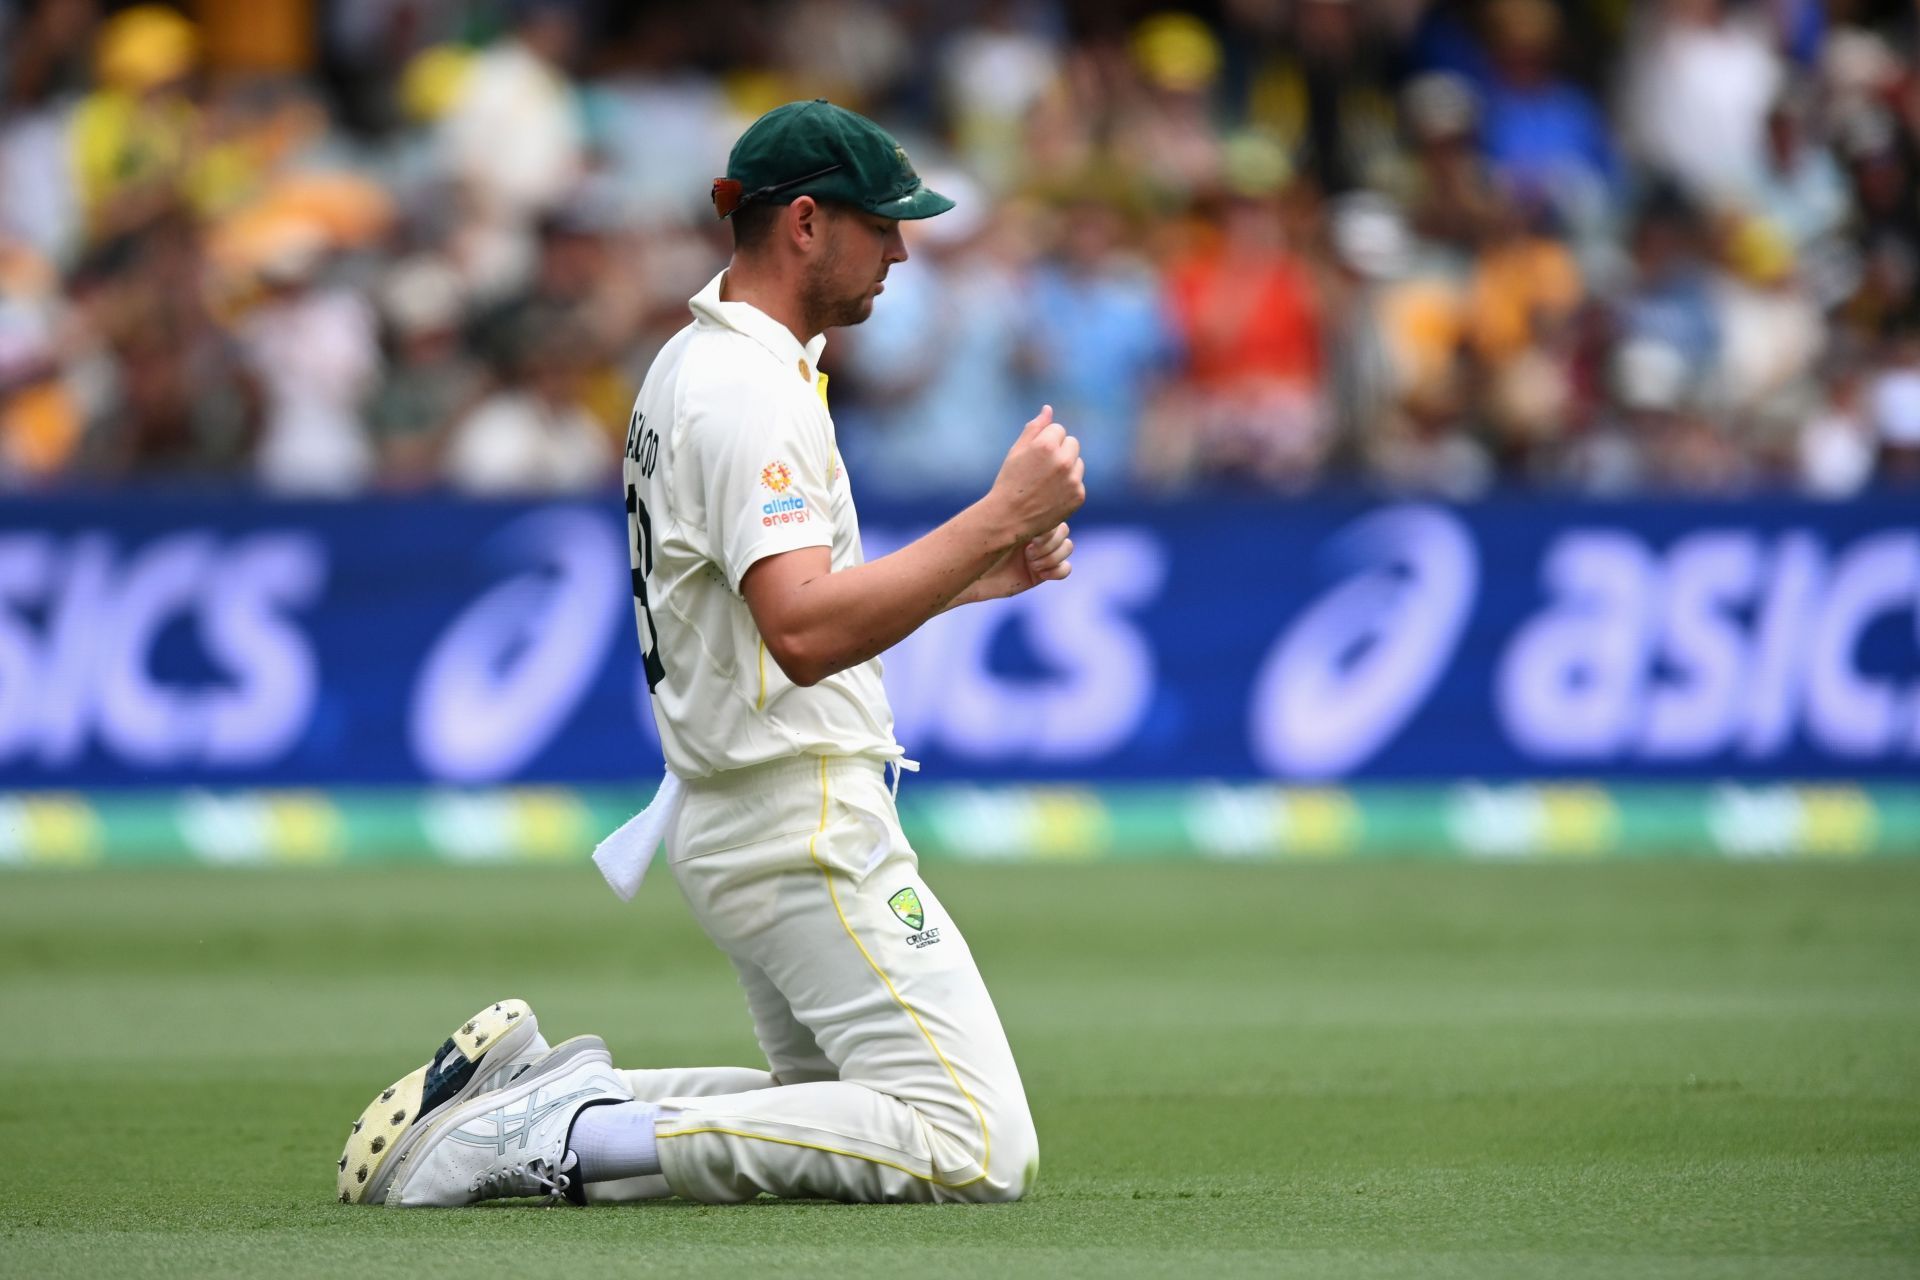 Hazlewood took two sensational catches in the deep on Day 1 of the first Ashes Test